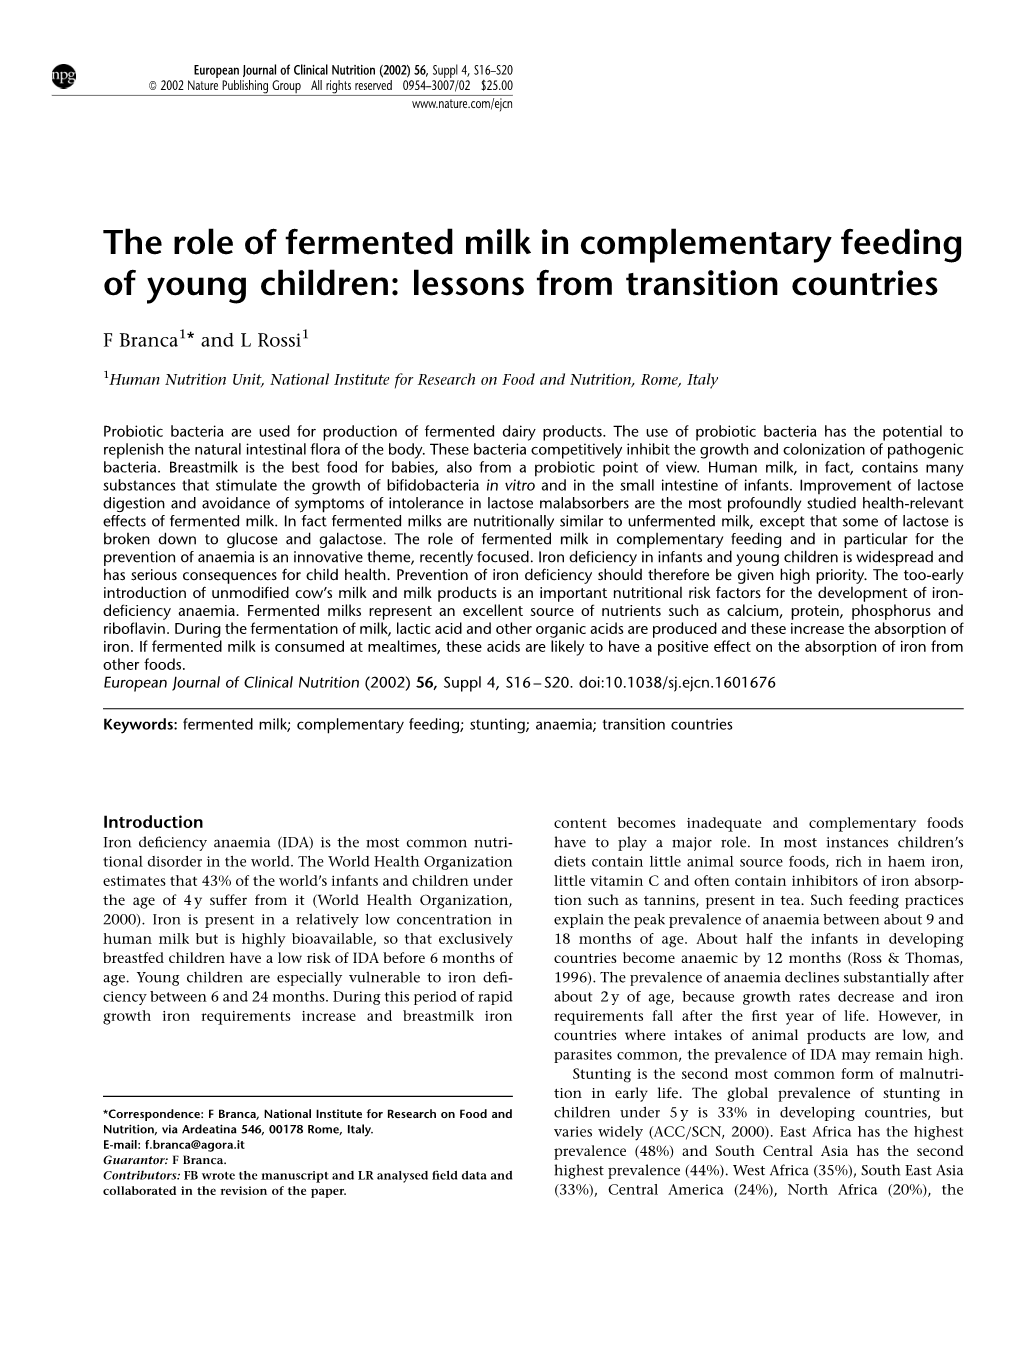 The Role of Fermented Milk in Complementary Feeding of Young Children: Lessons from Transition Countries